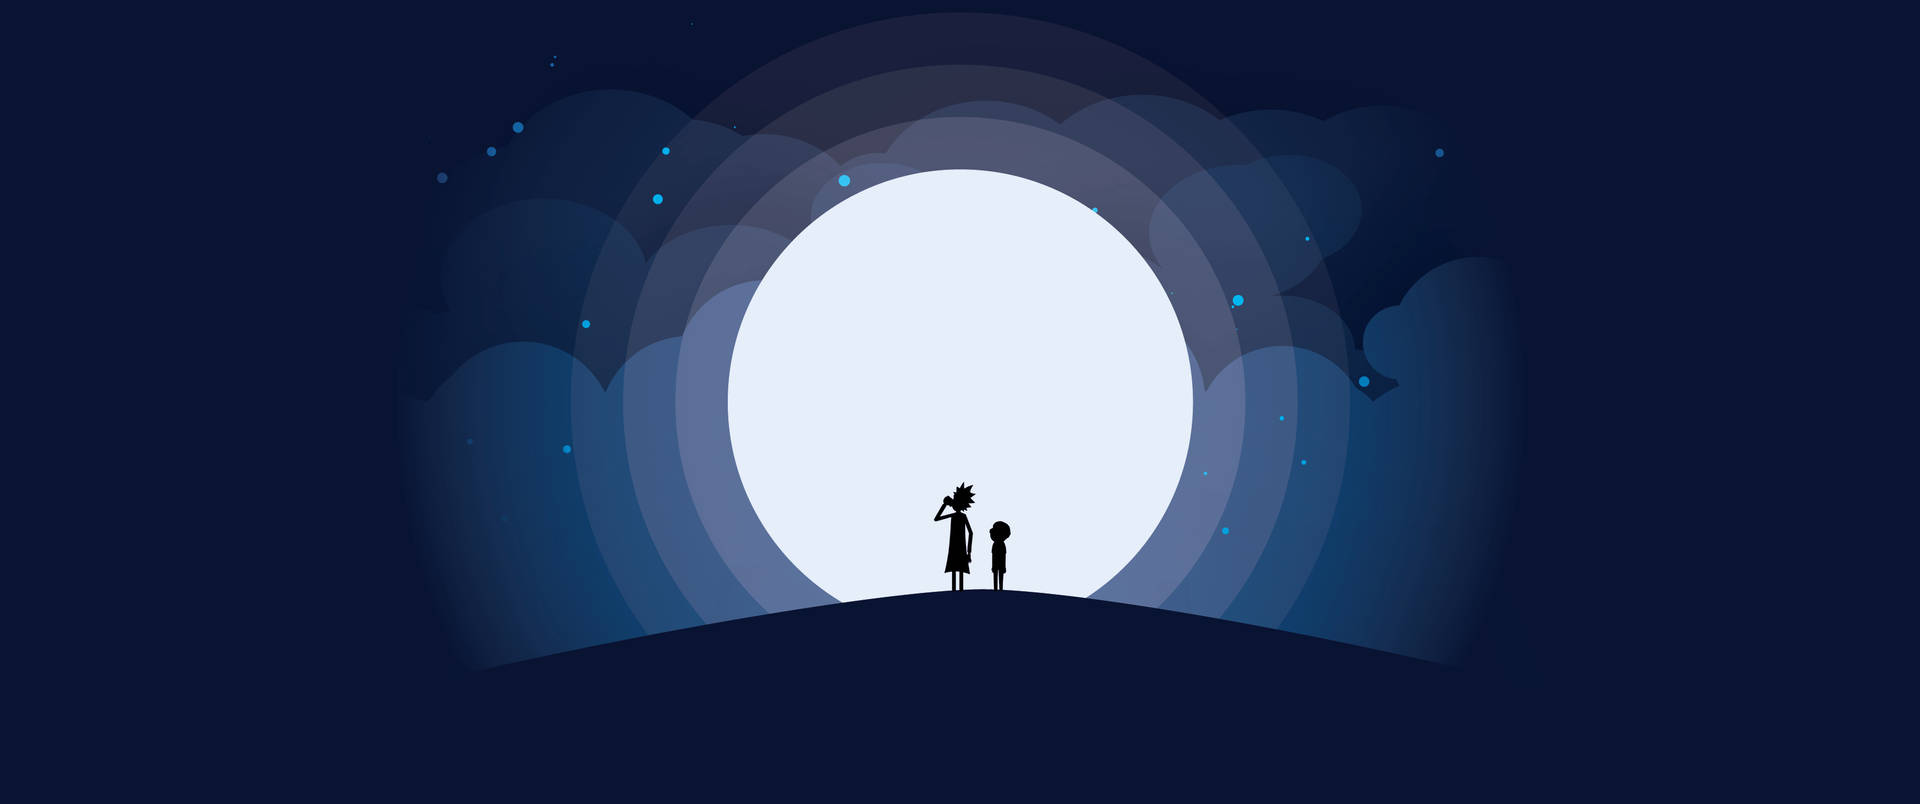 Rick And Morty Silhouette Against The Moon Background